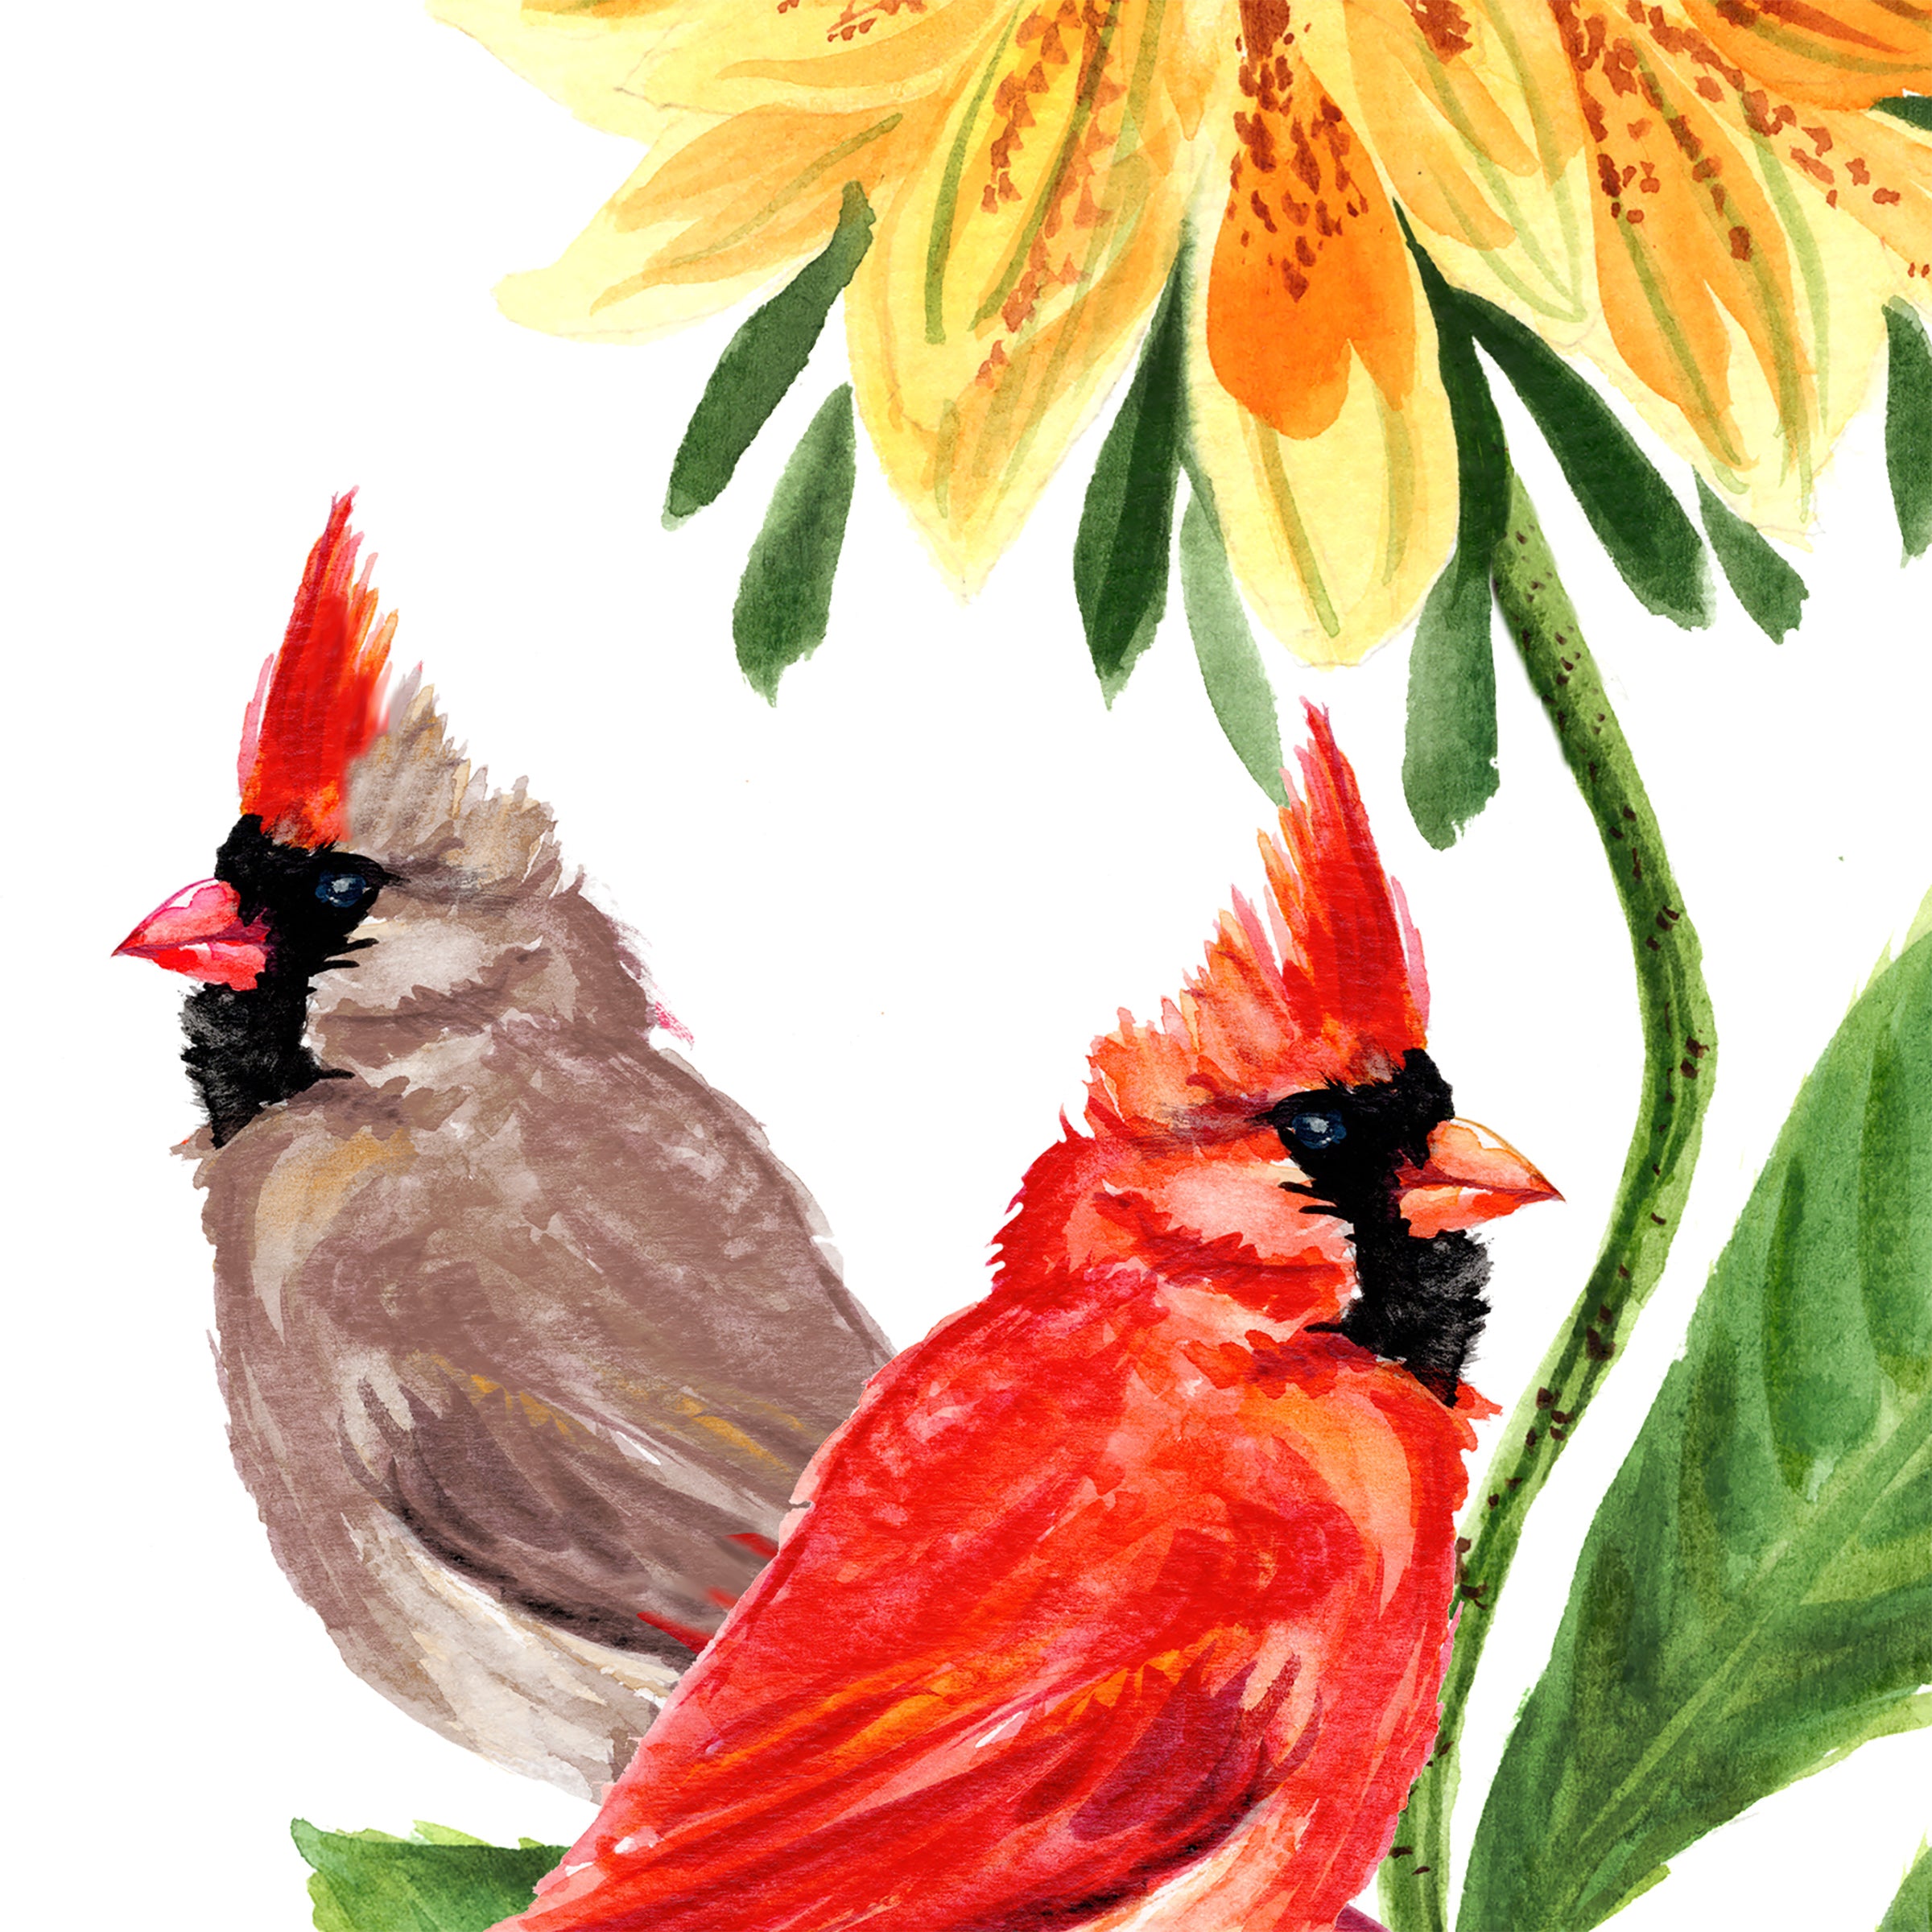 Mr. and Mrs. Cardinal Birds Watercolor Unframed Wall Art Print by Michelle Mospens